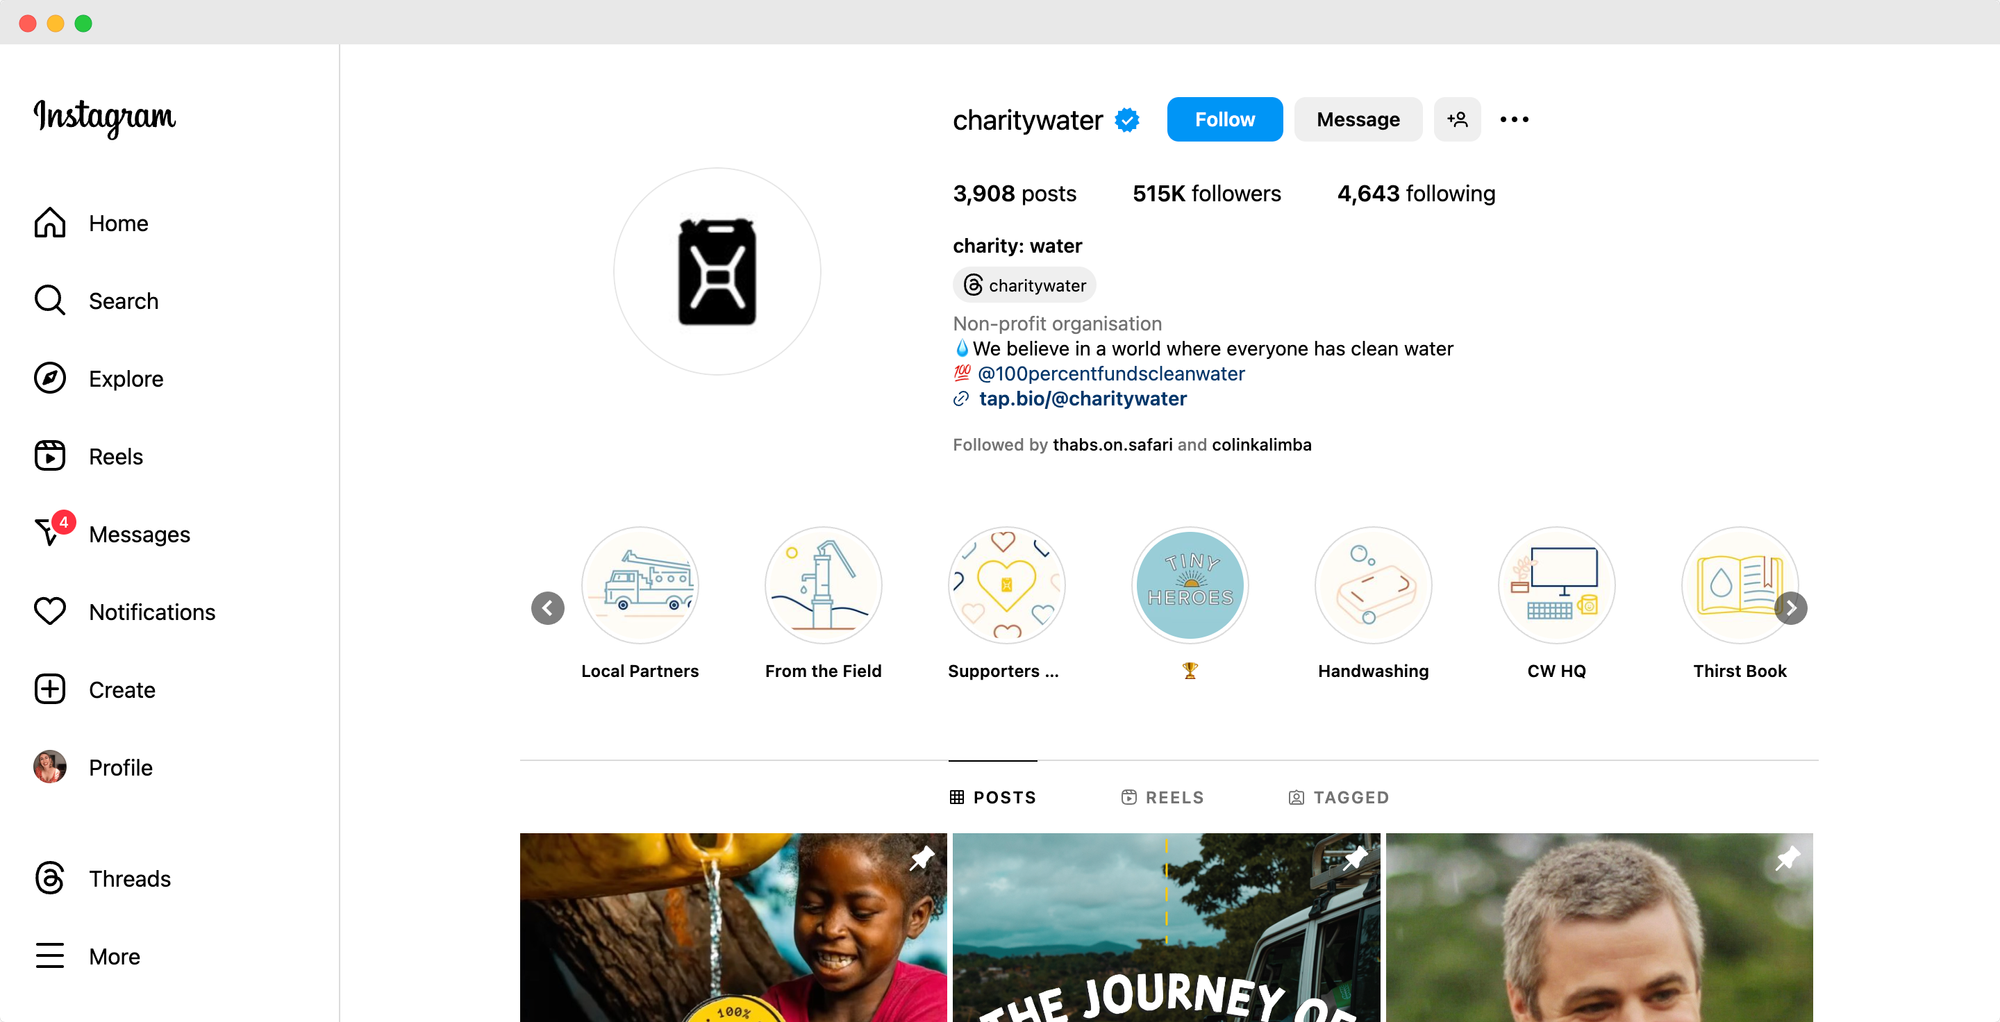 Charity Water's Instagram page